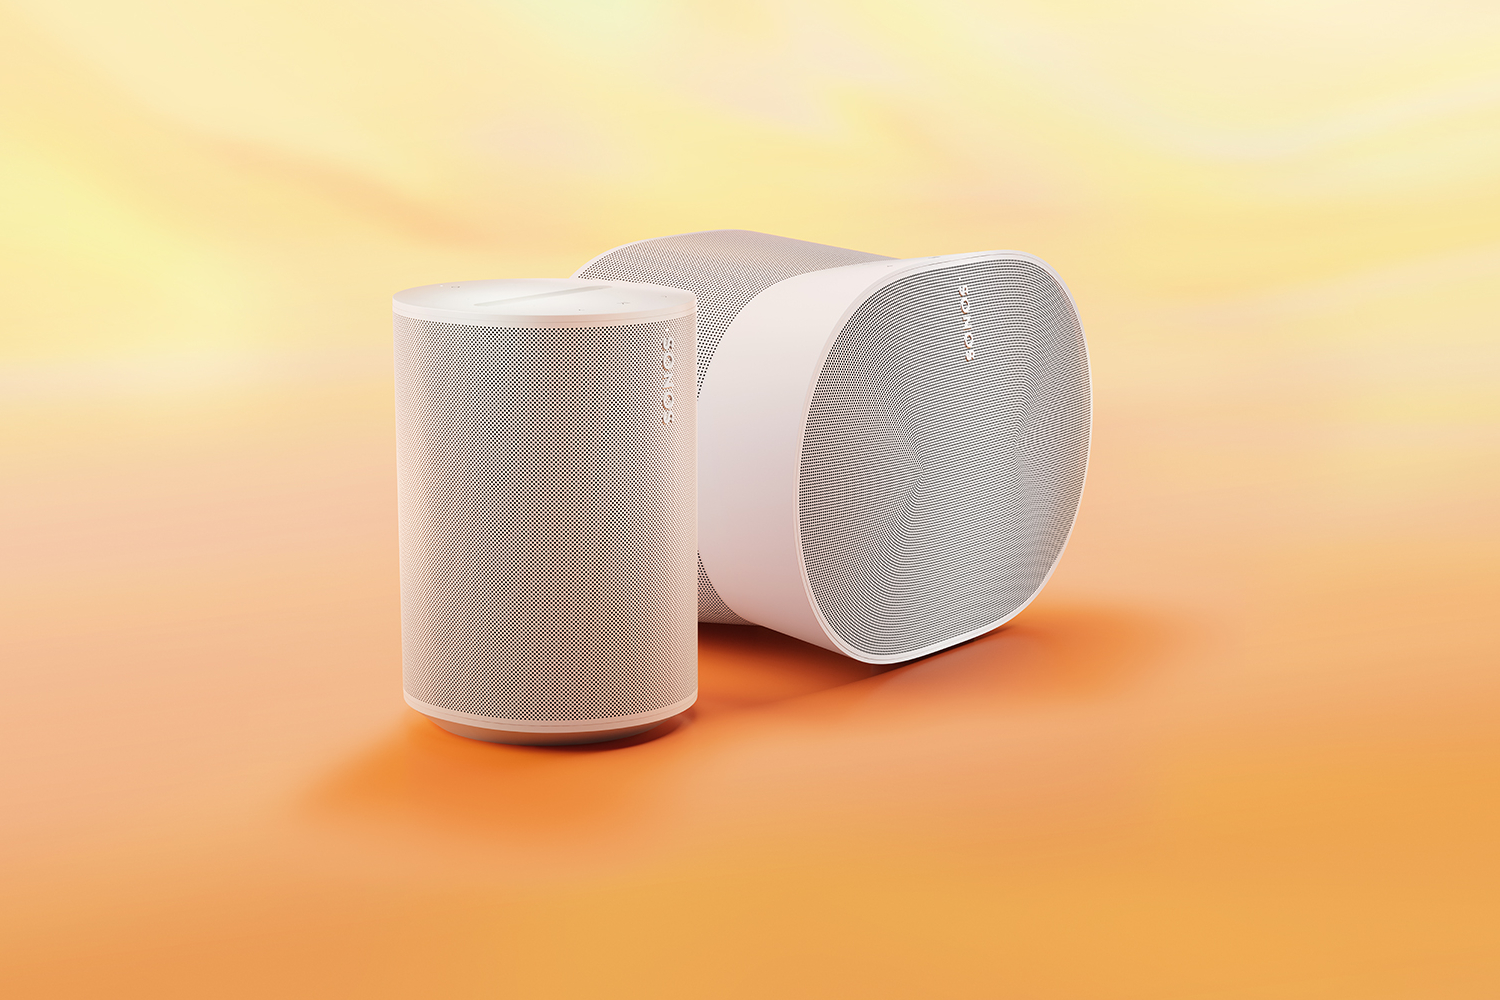 Do afbryde At bygge Sonos Era 300 vs Era 100: what's the difference? | Stuff